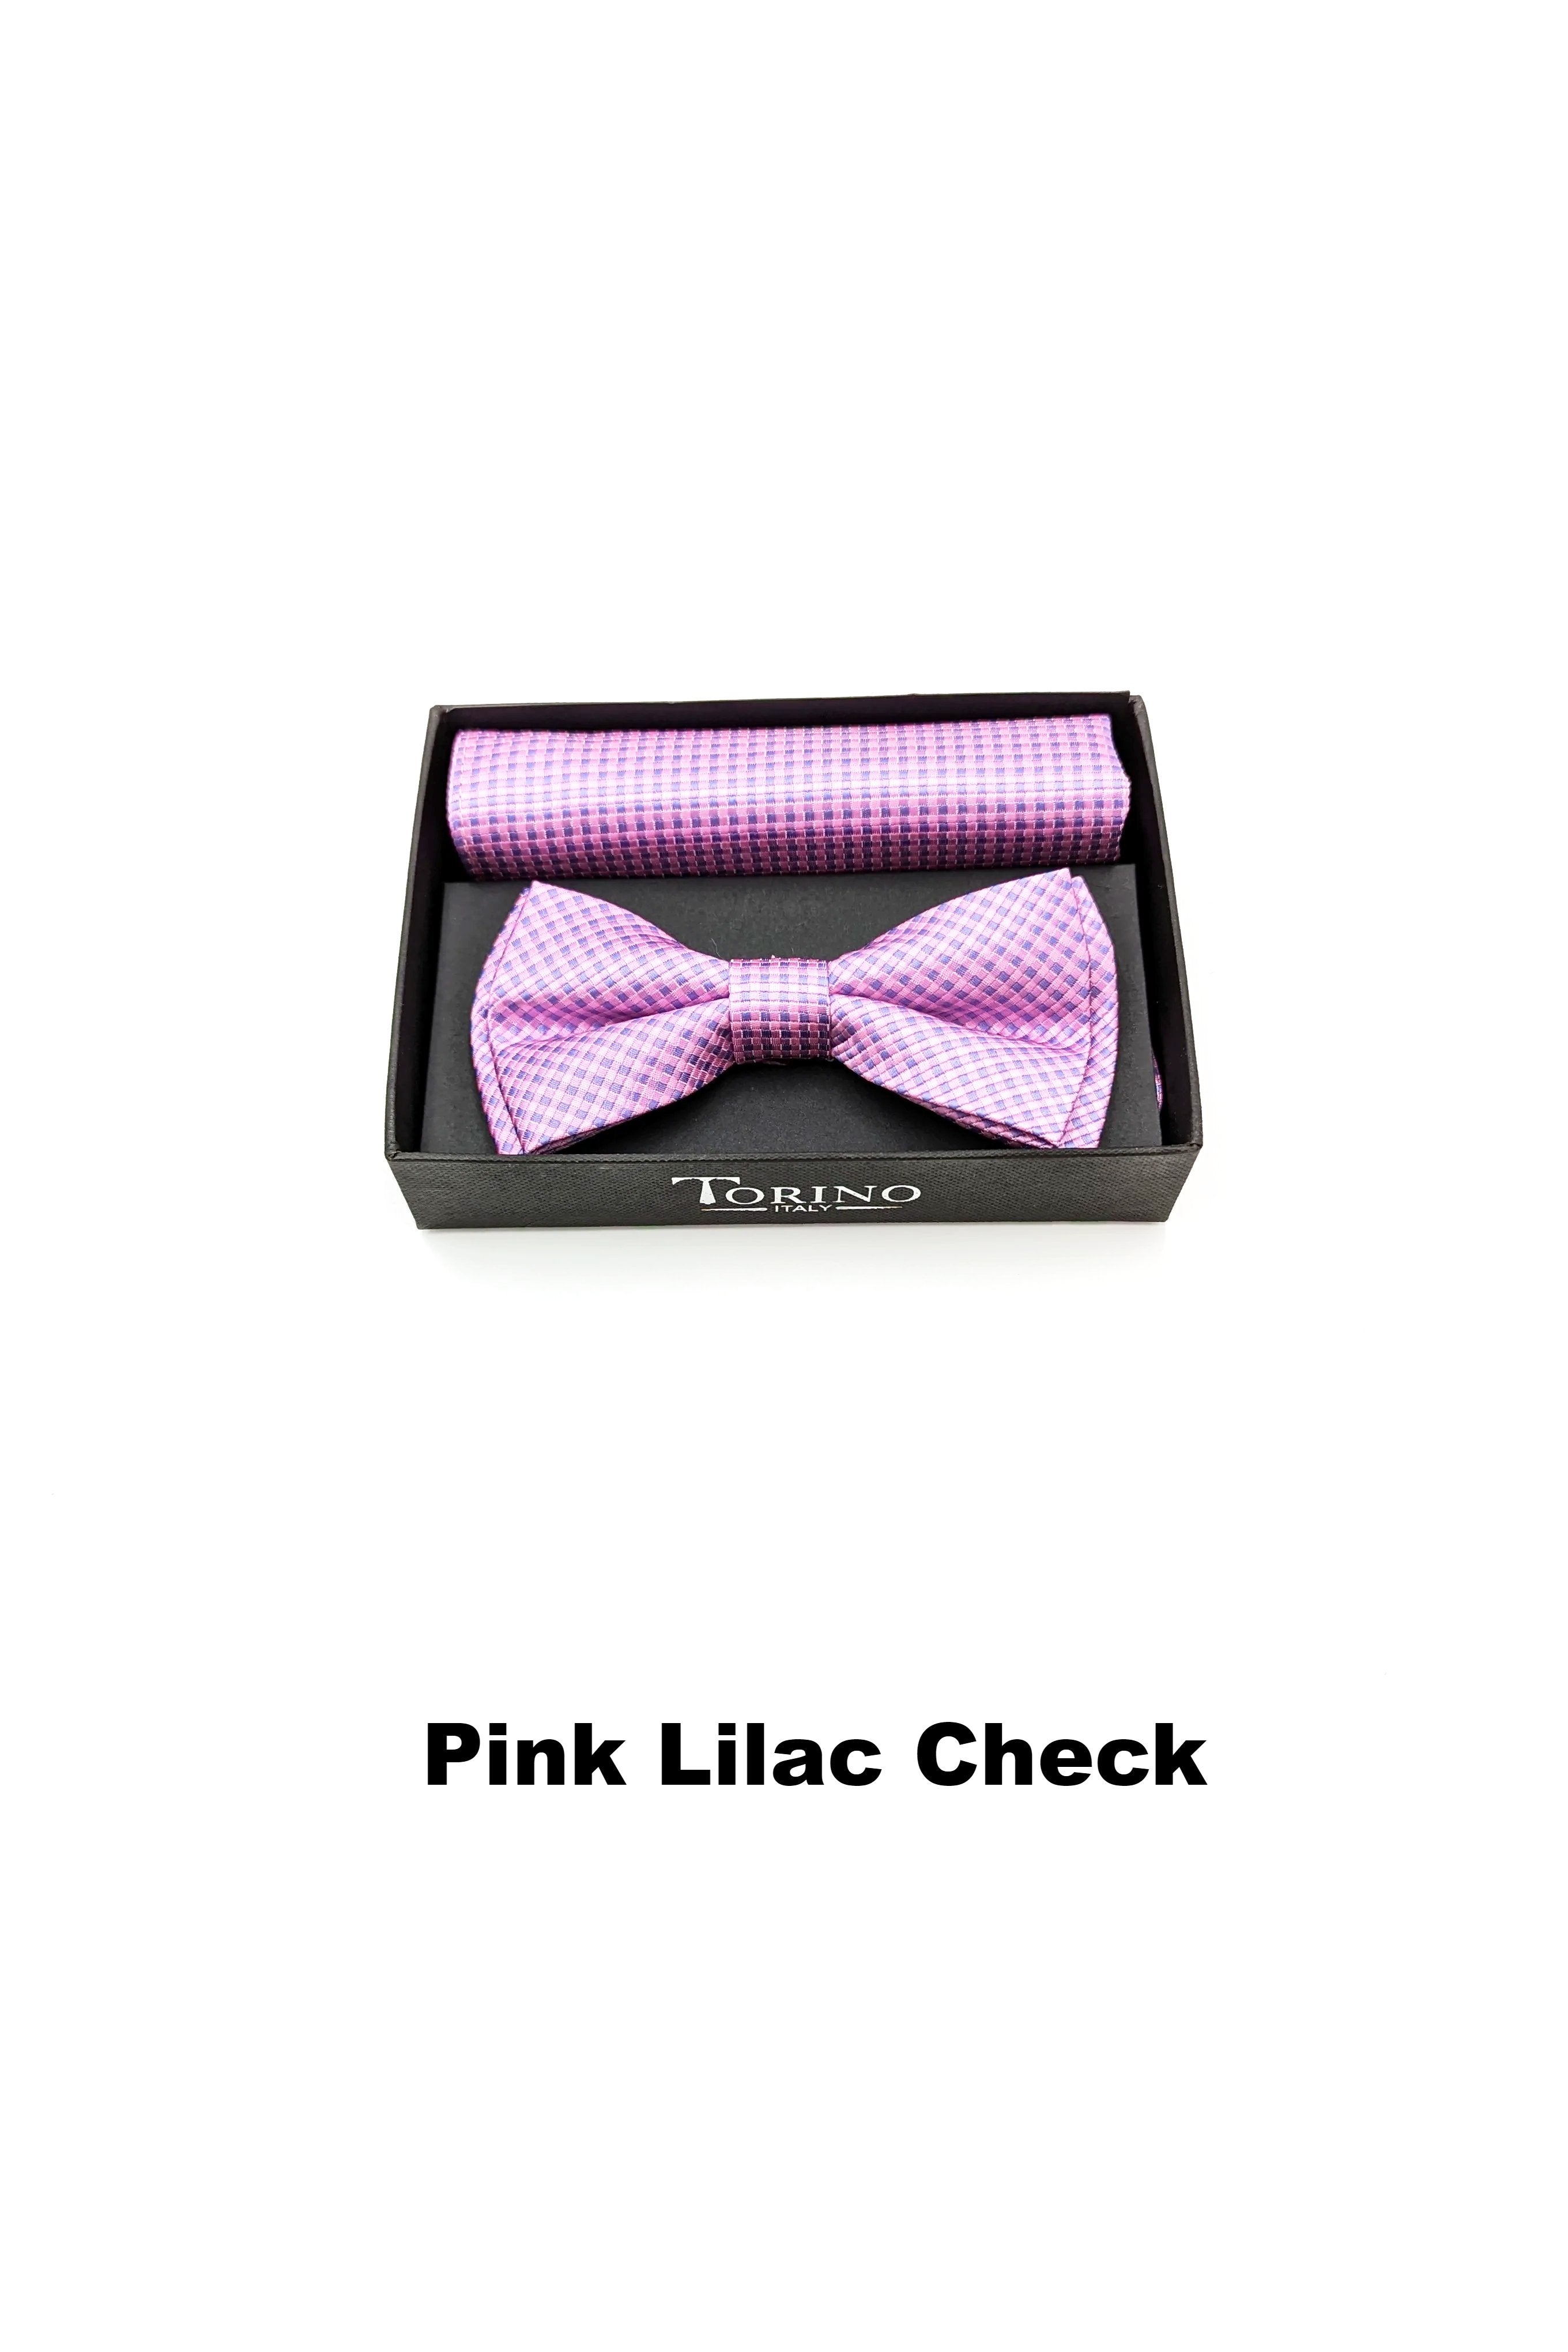 Textured Mens Pink Lilac Check Bow and Pocket Square